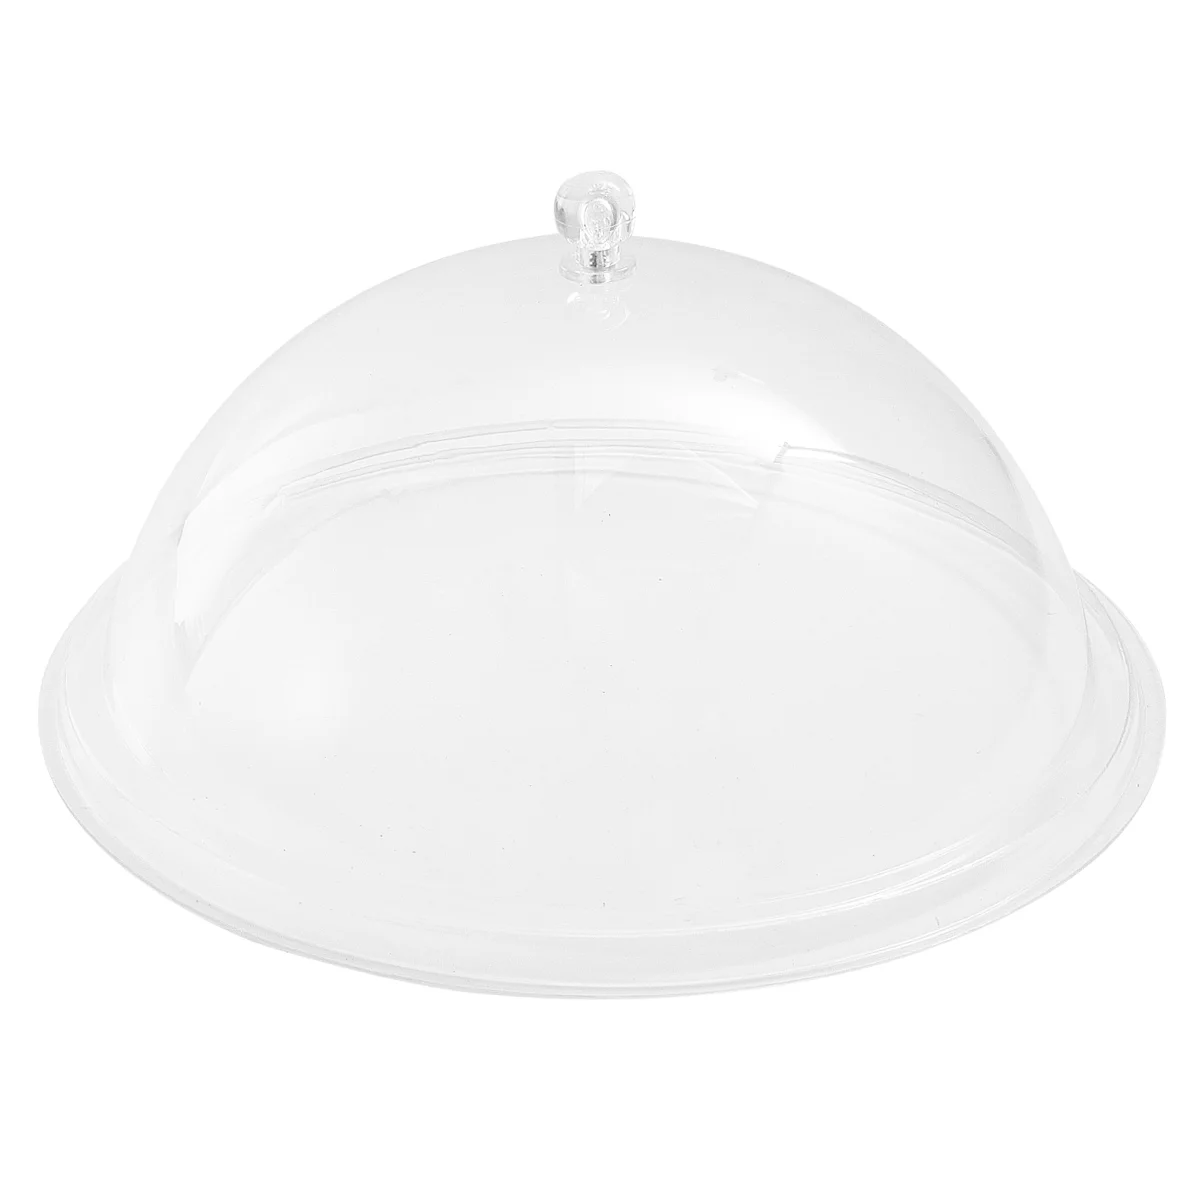 

Cover Dome Cake Acrylic Covers Clear Microwave Dessert Plate Display Inch Lid Guard Tent Butter Fly Splatter Outside Net Cheese